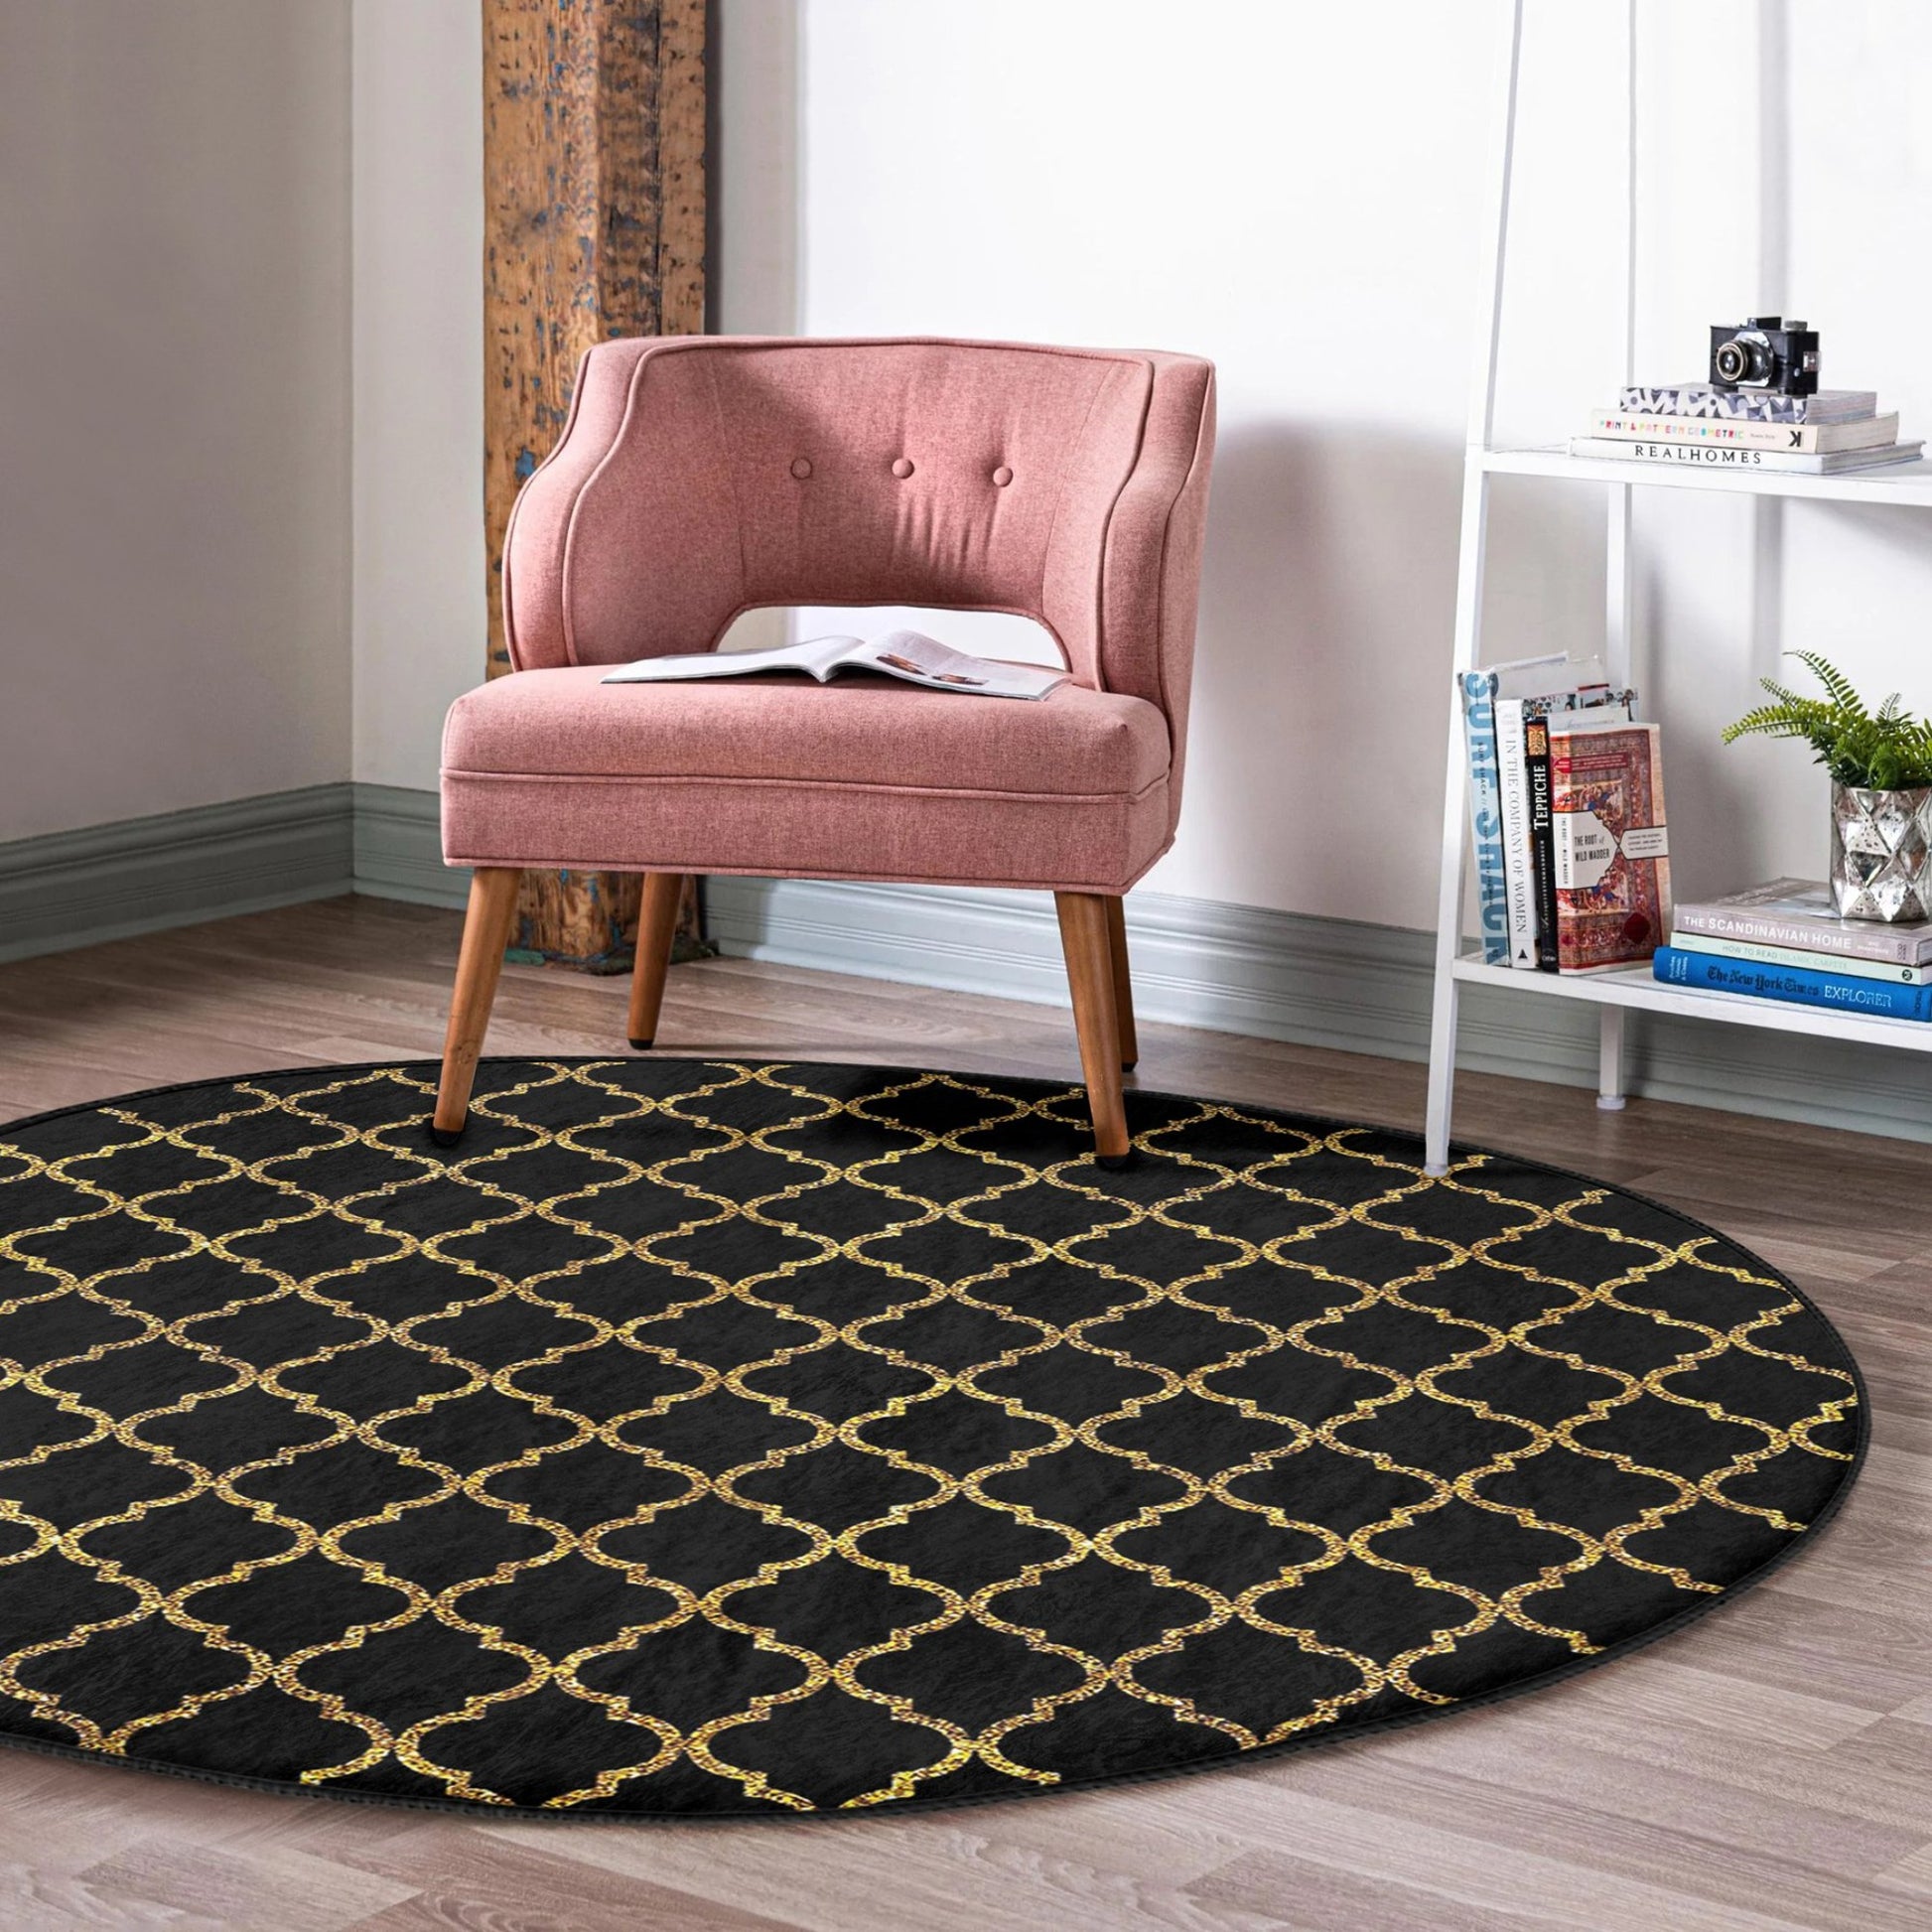 Washable Rug with Gold Pattern - Easy Maintenance